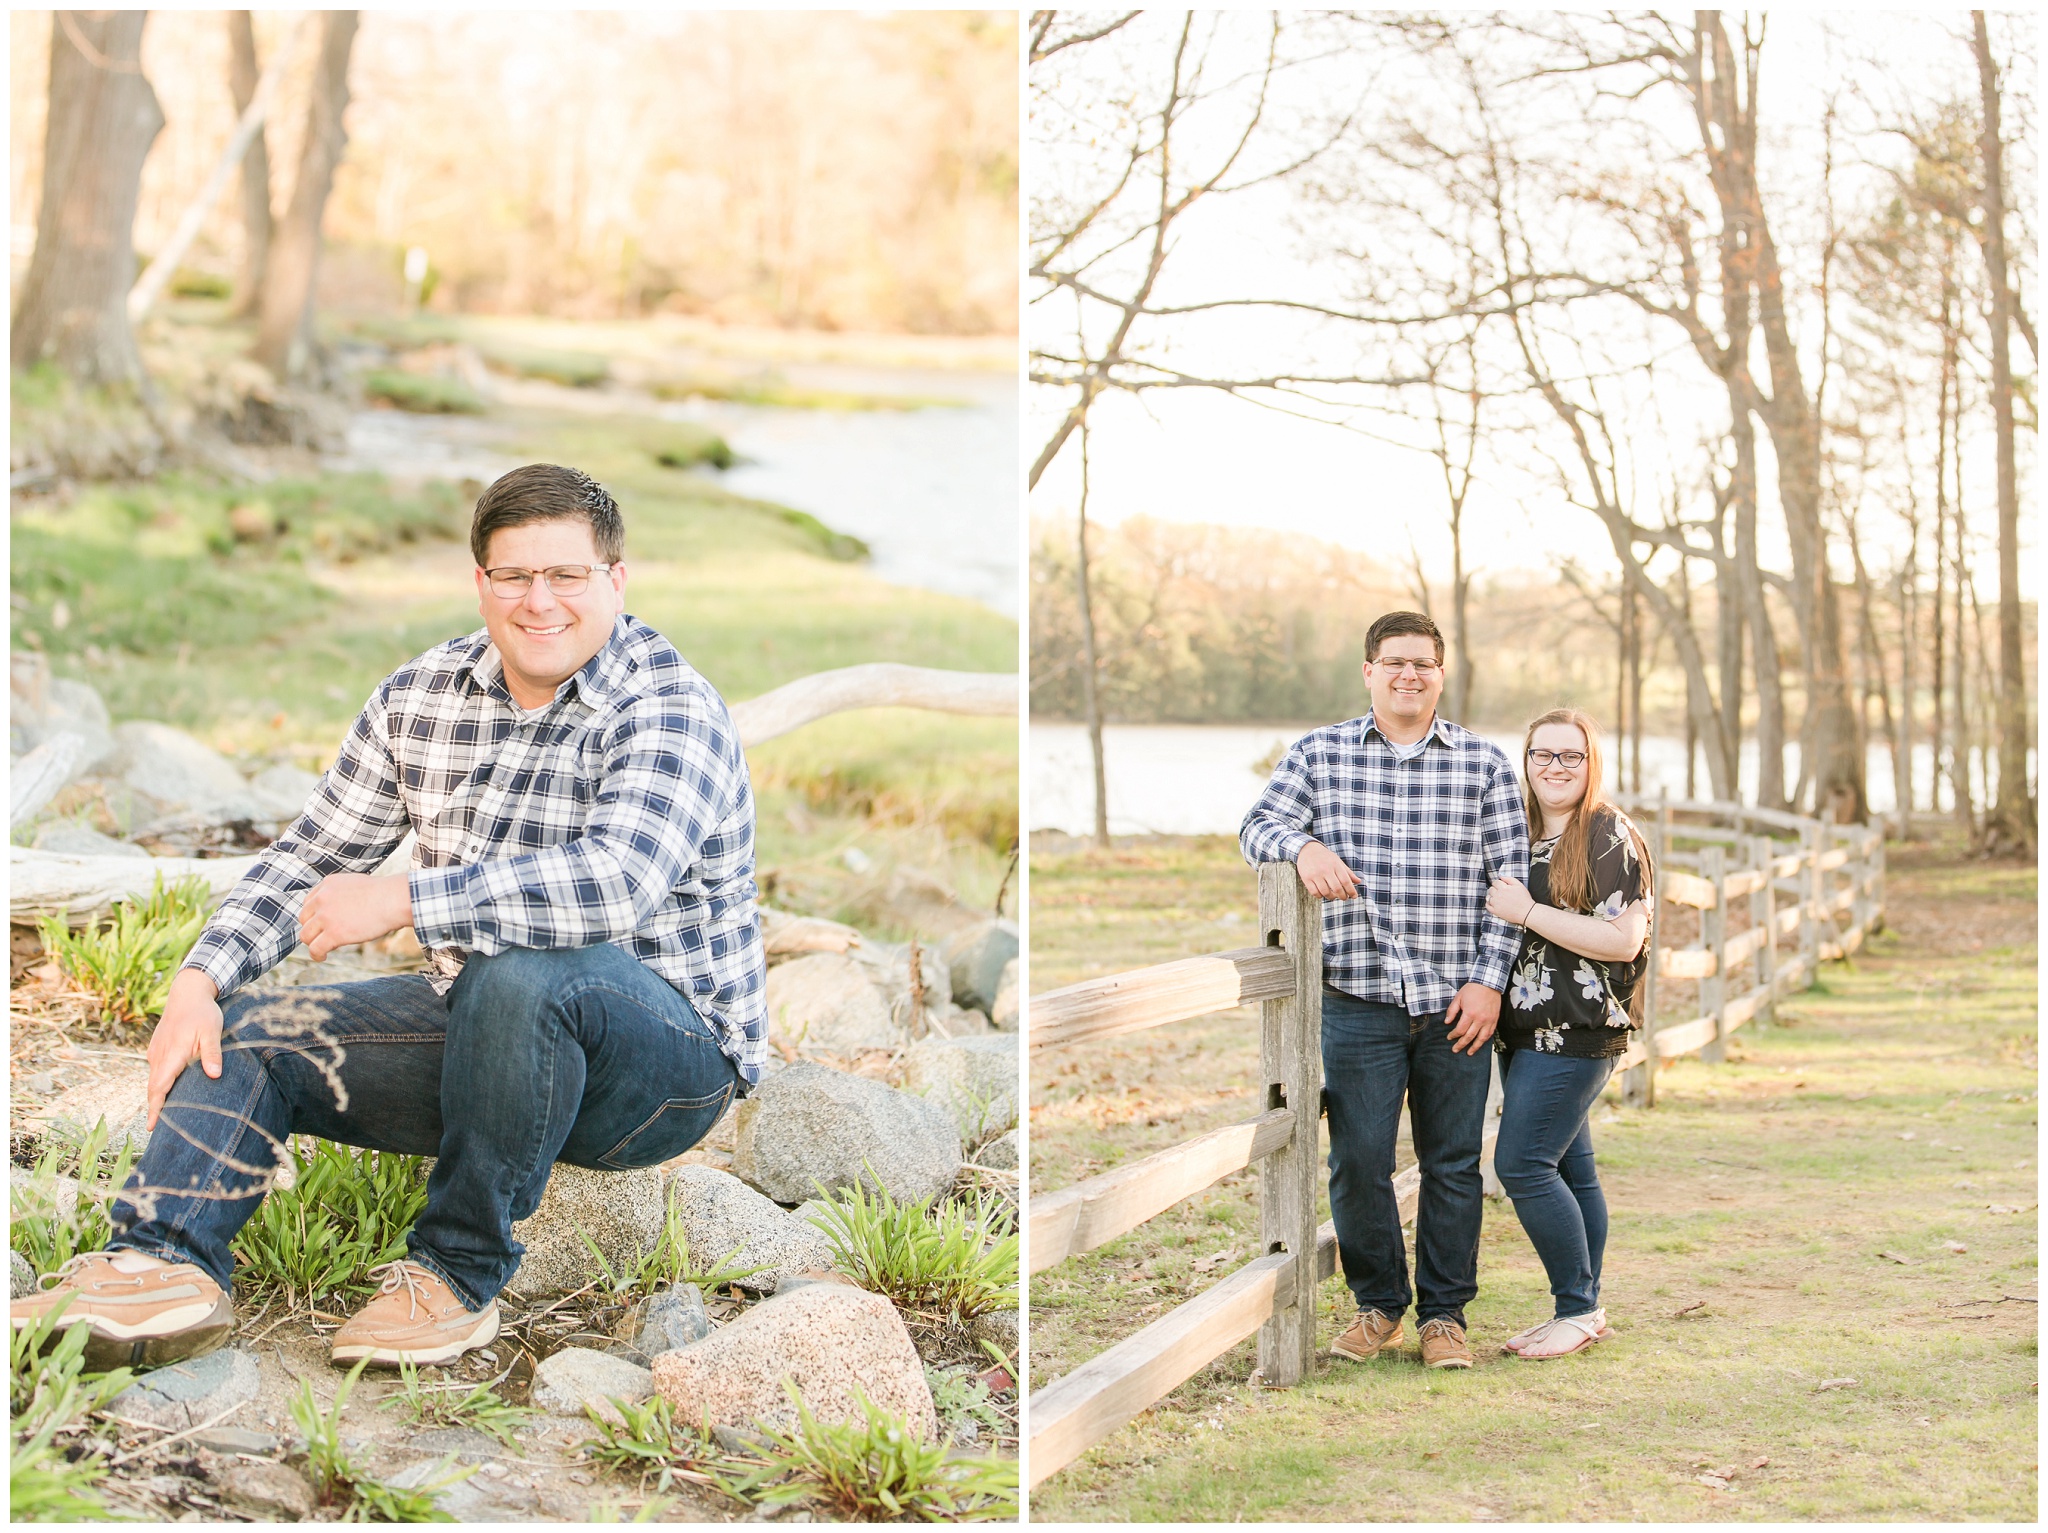 Wagon Hill Engagement Session New Hampshire | Amy Brown Phtography | Flag HillWinery Bride Wedding